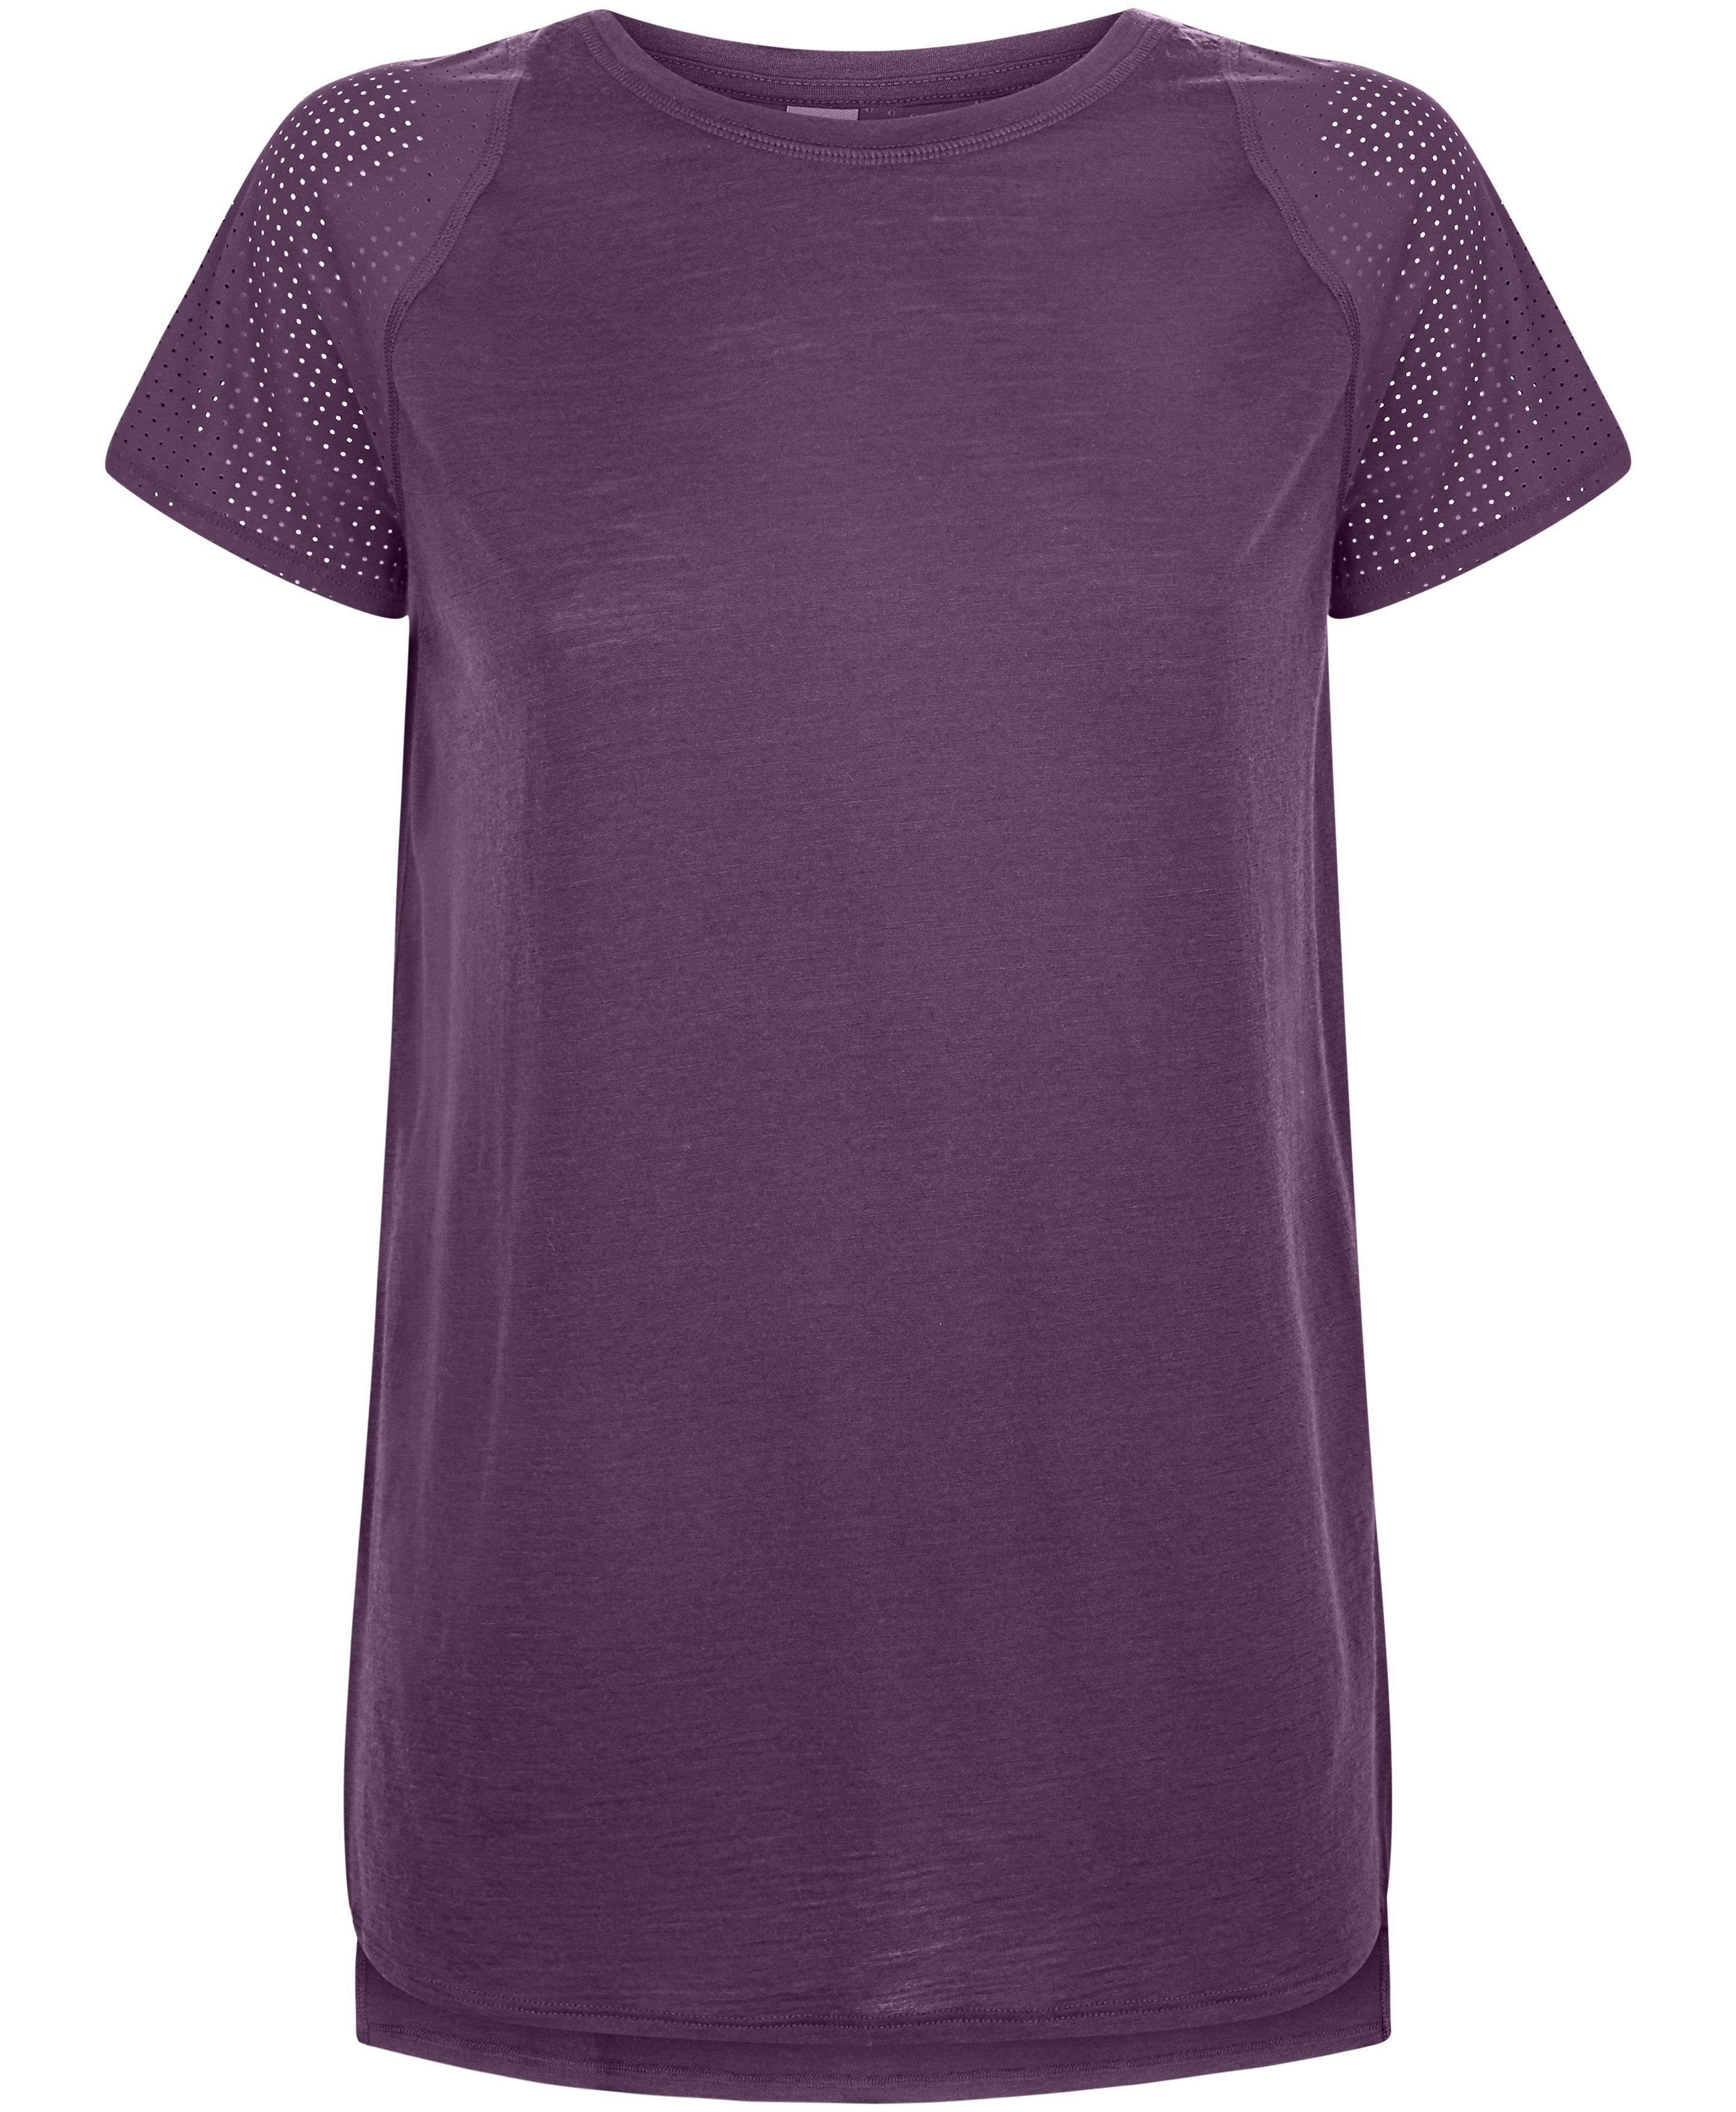 In our temperature-regulating hero fabric, this lightweight tee is made for running and sweaty workouts.